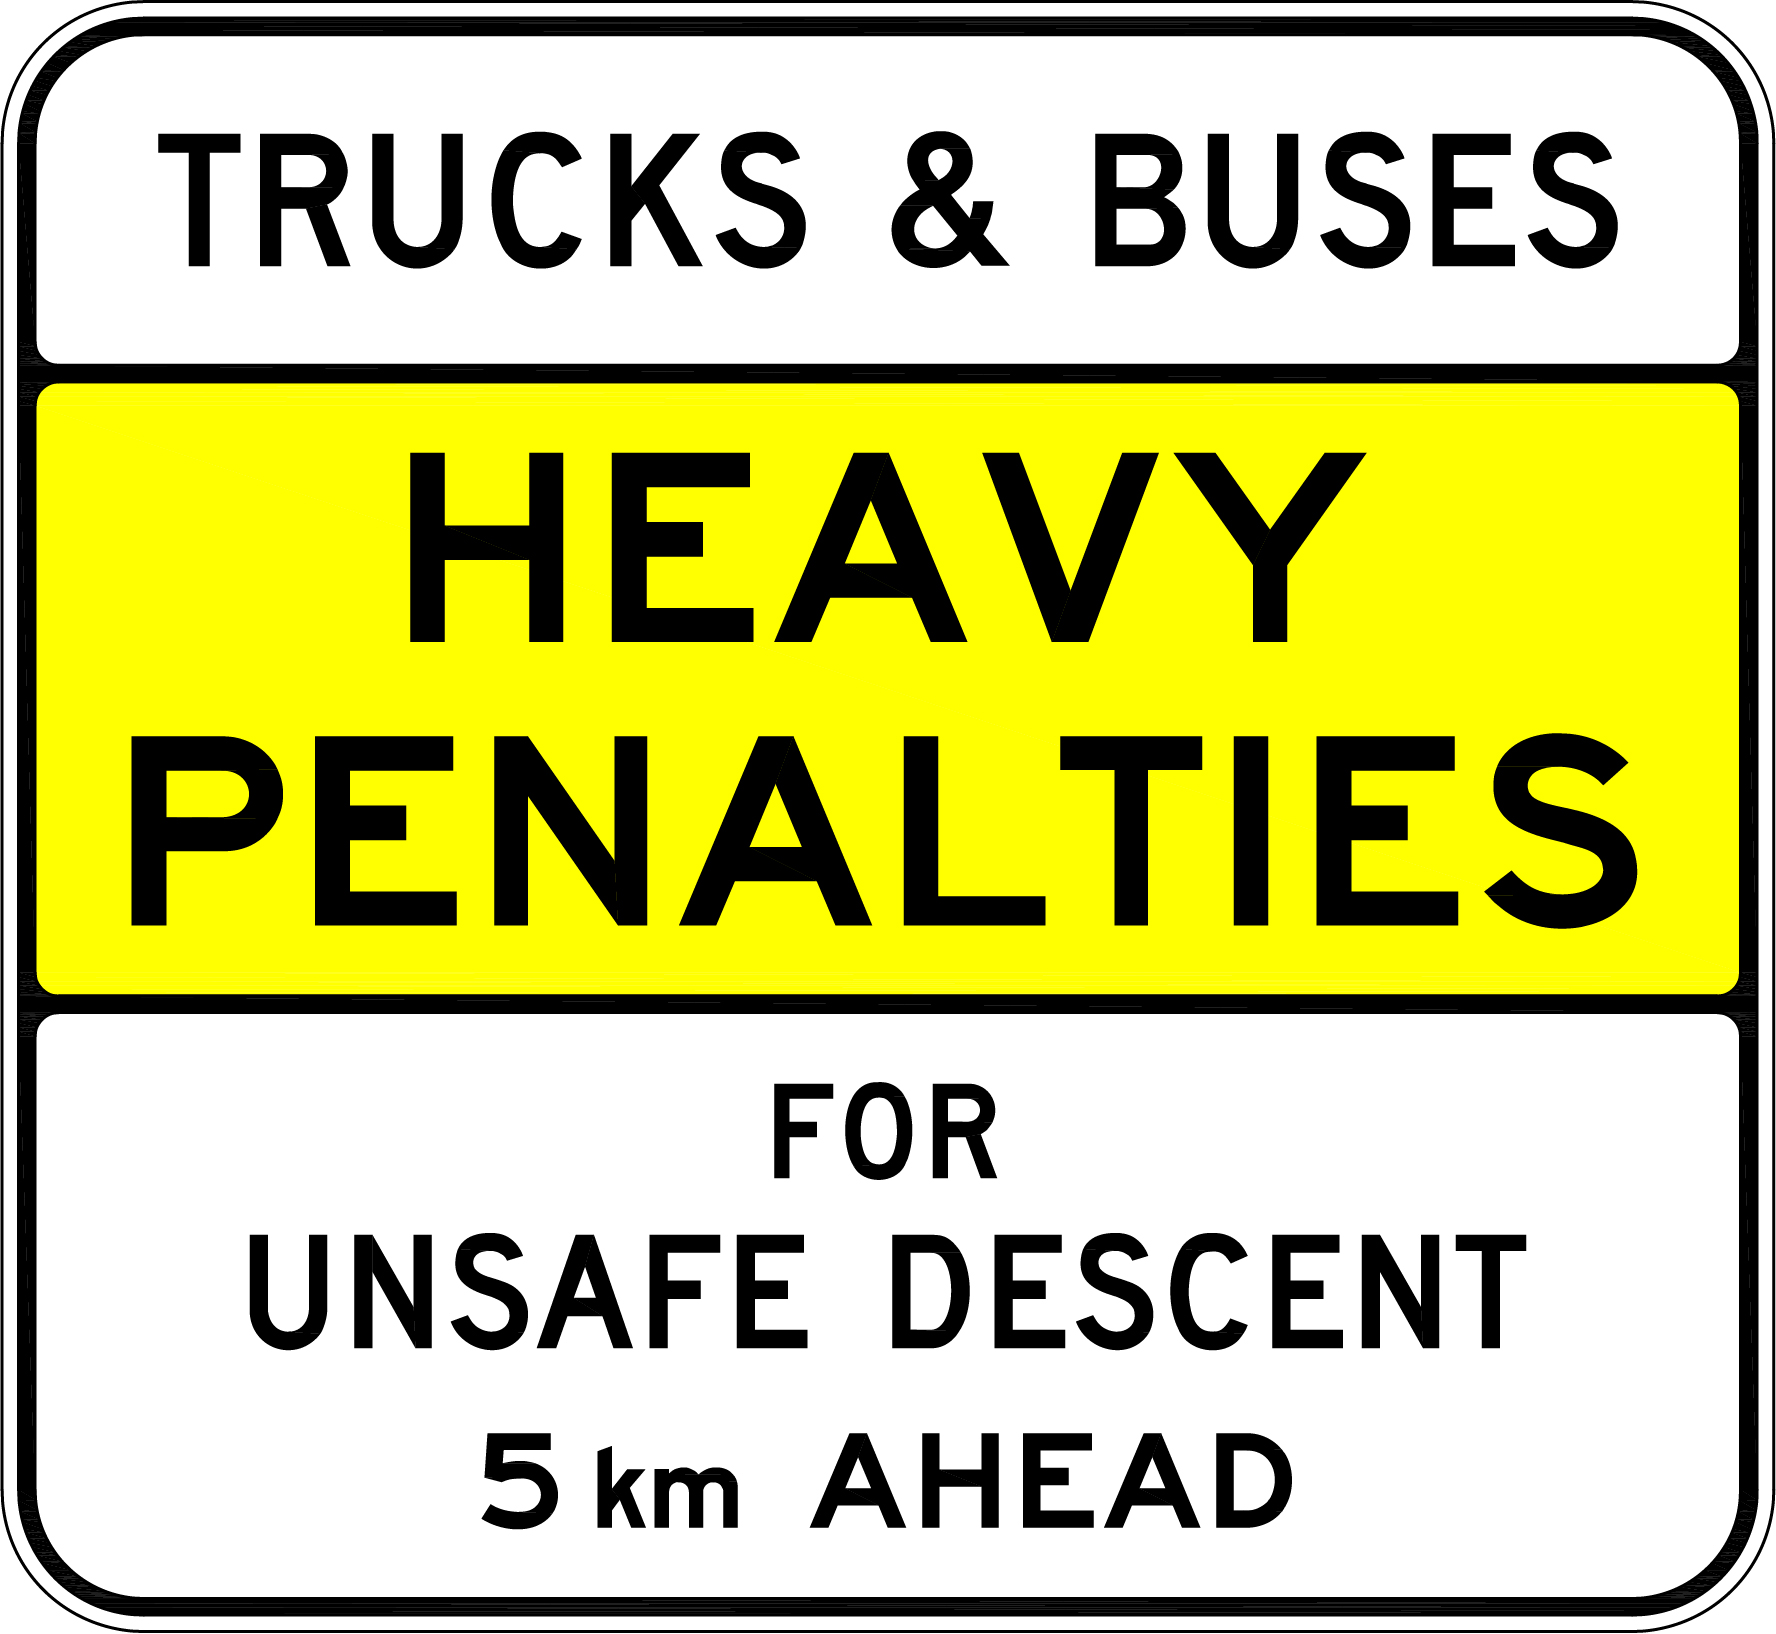 Truck and Bus unsafe descent sign